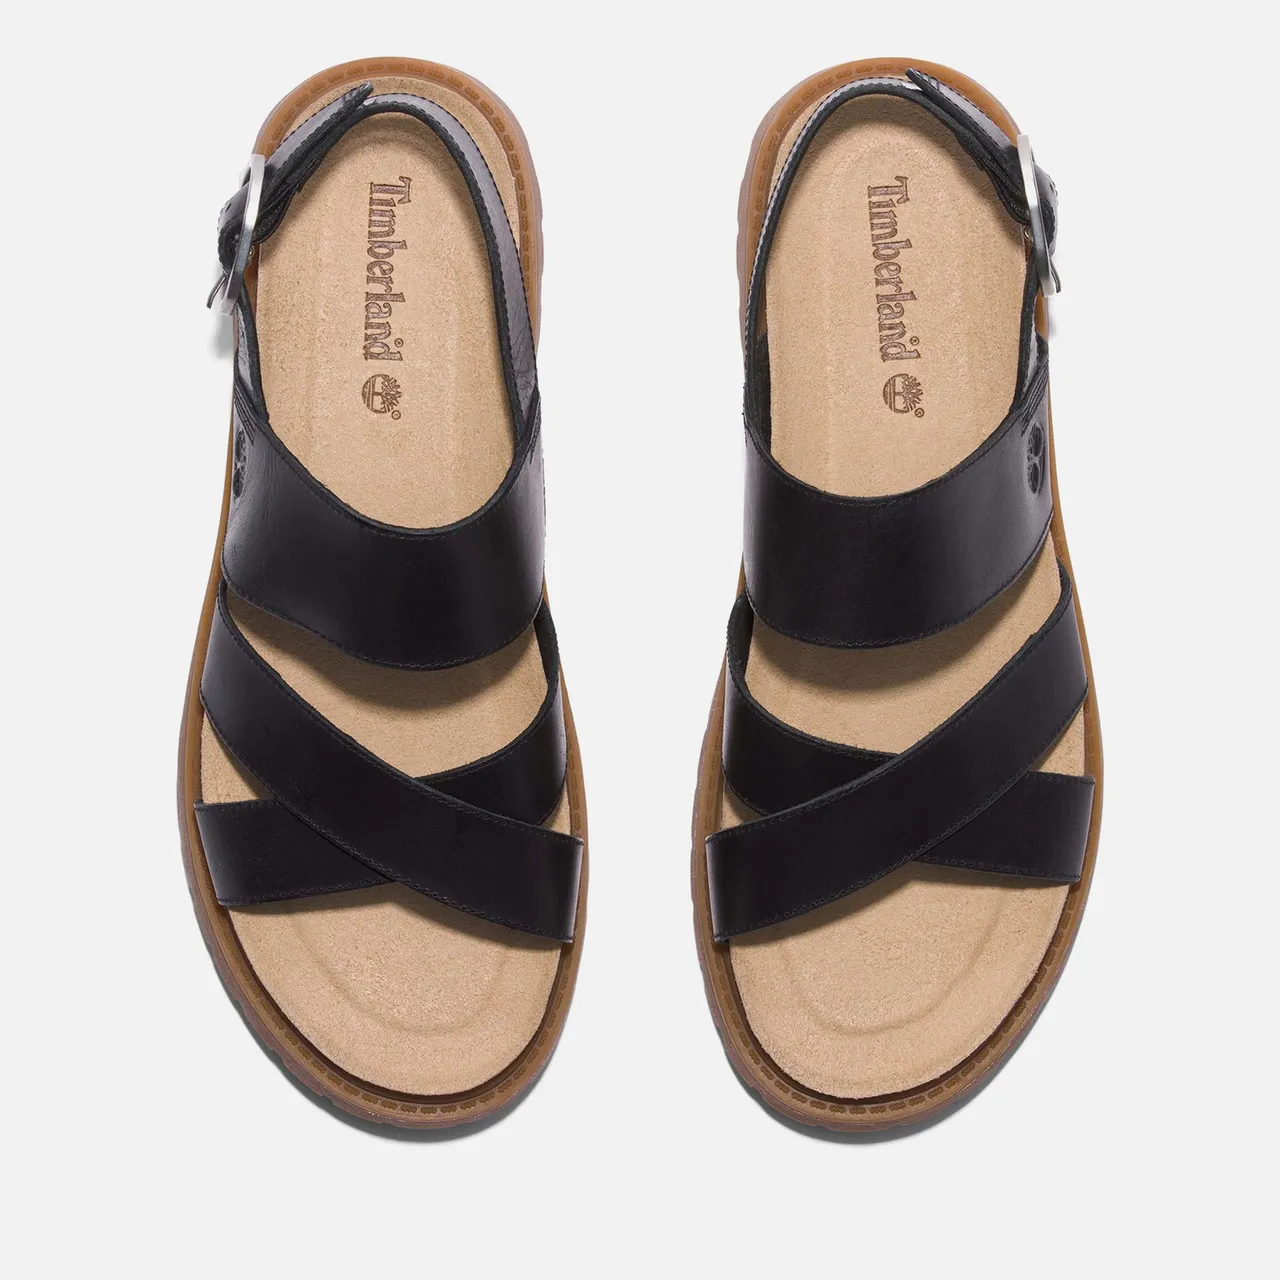 Timberland Women's Clairemont Way Leather Sandals - UK